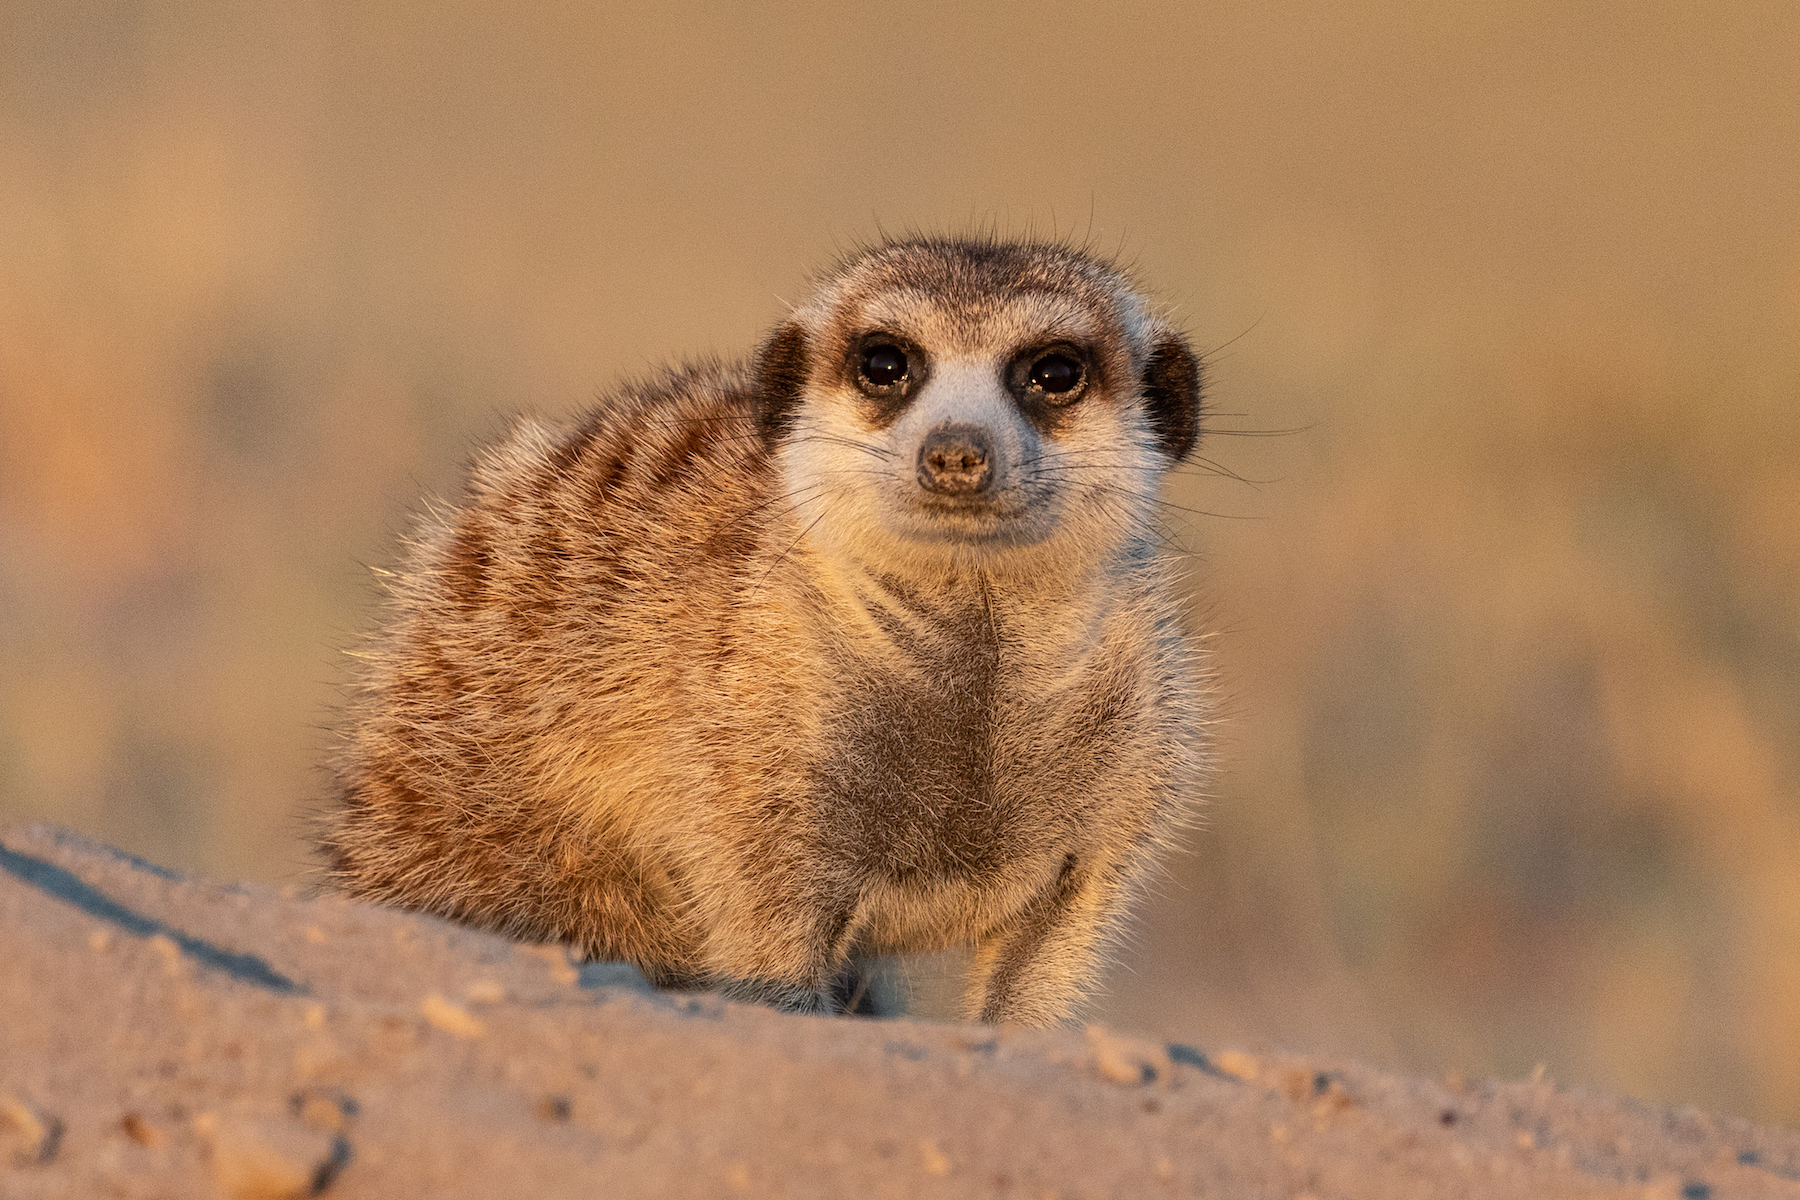 Meerkat photography in Botswana with Wild Images photo tours